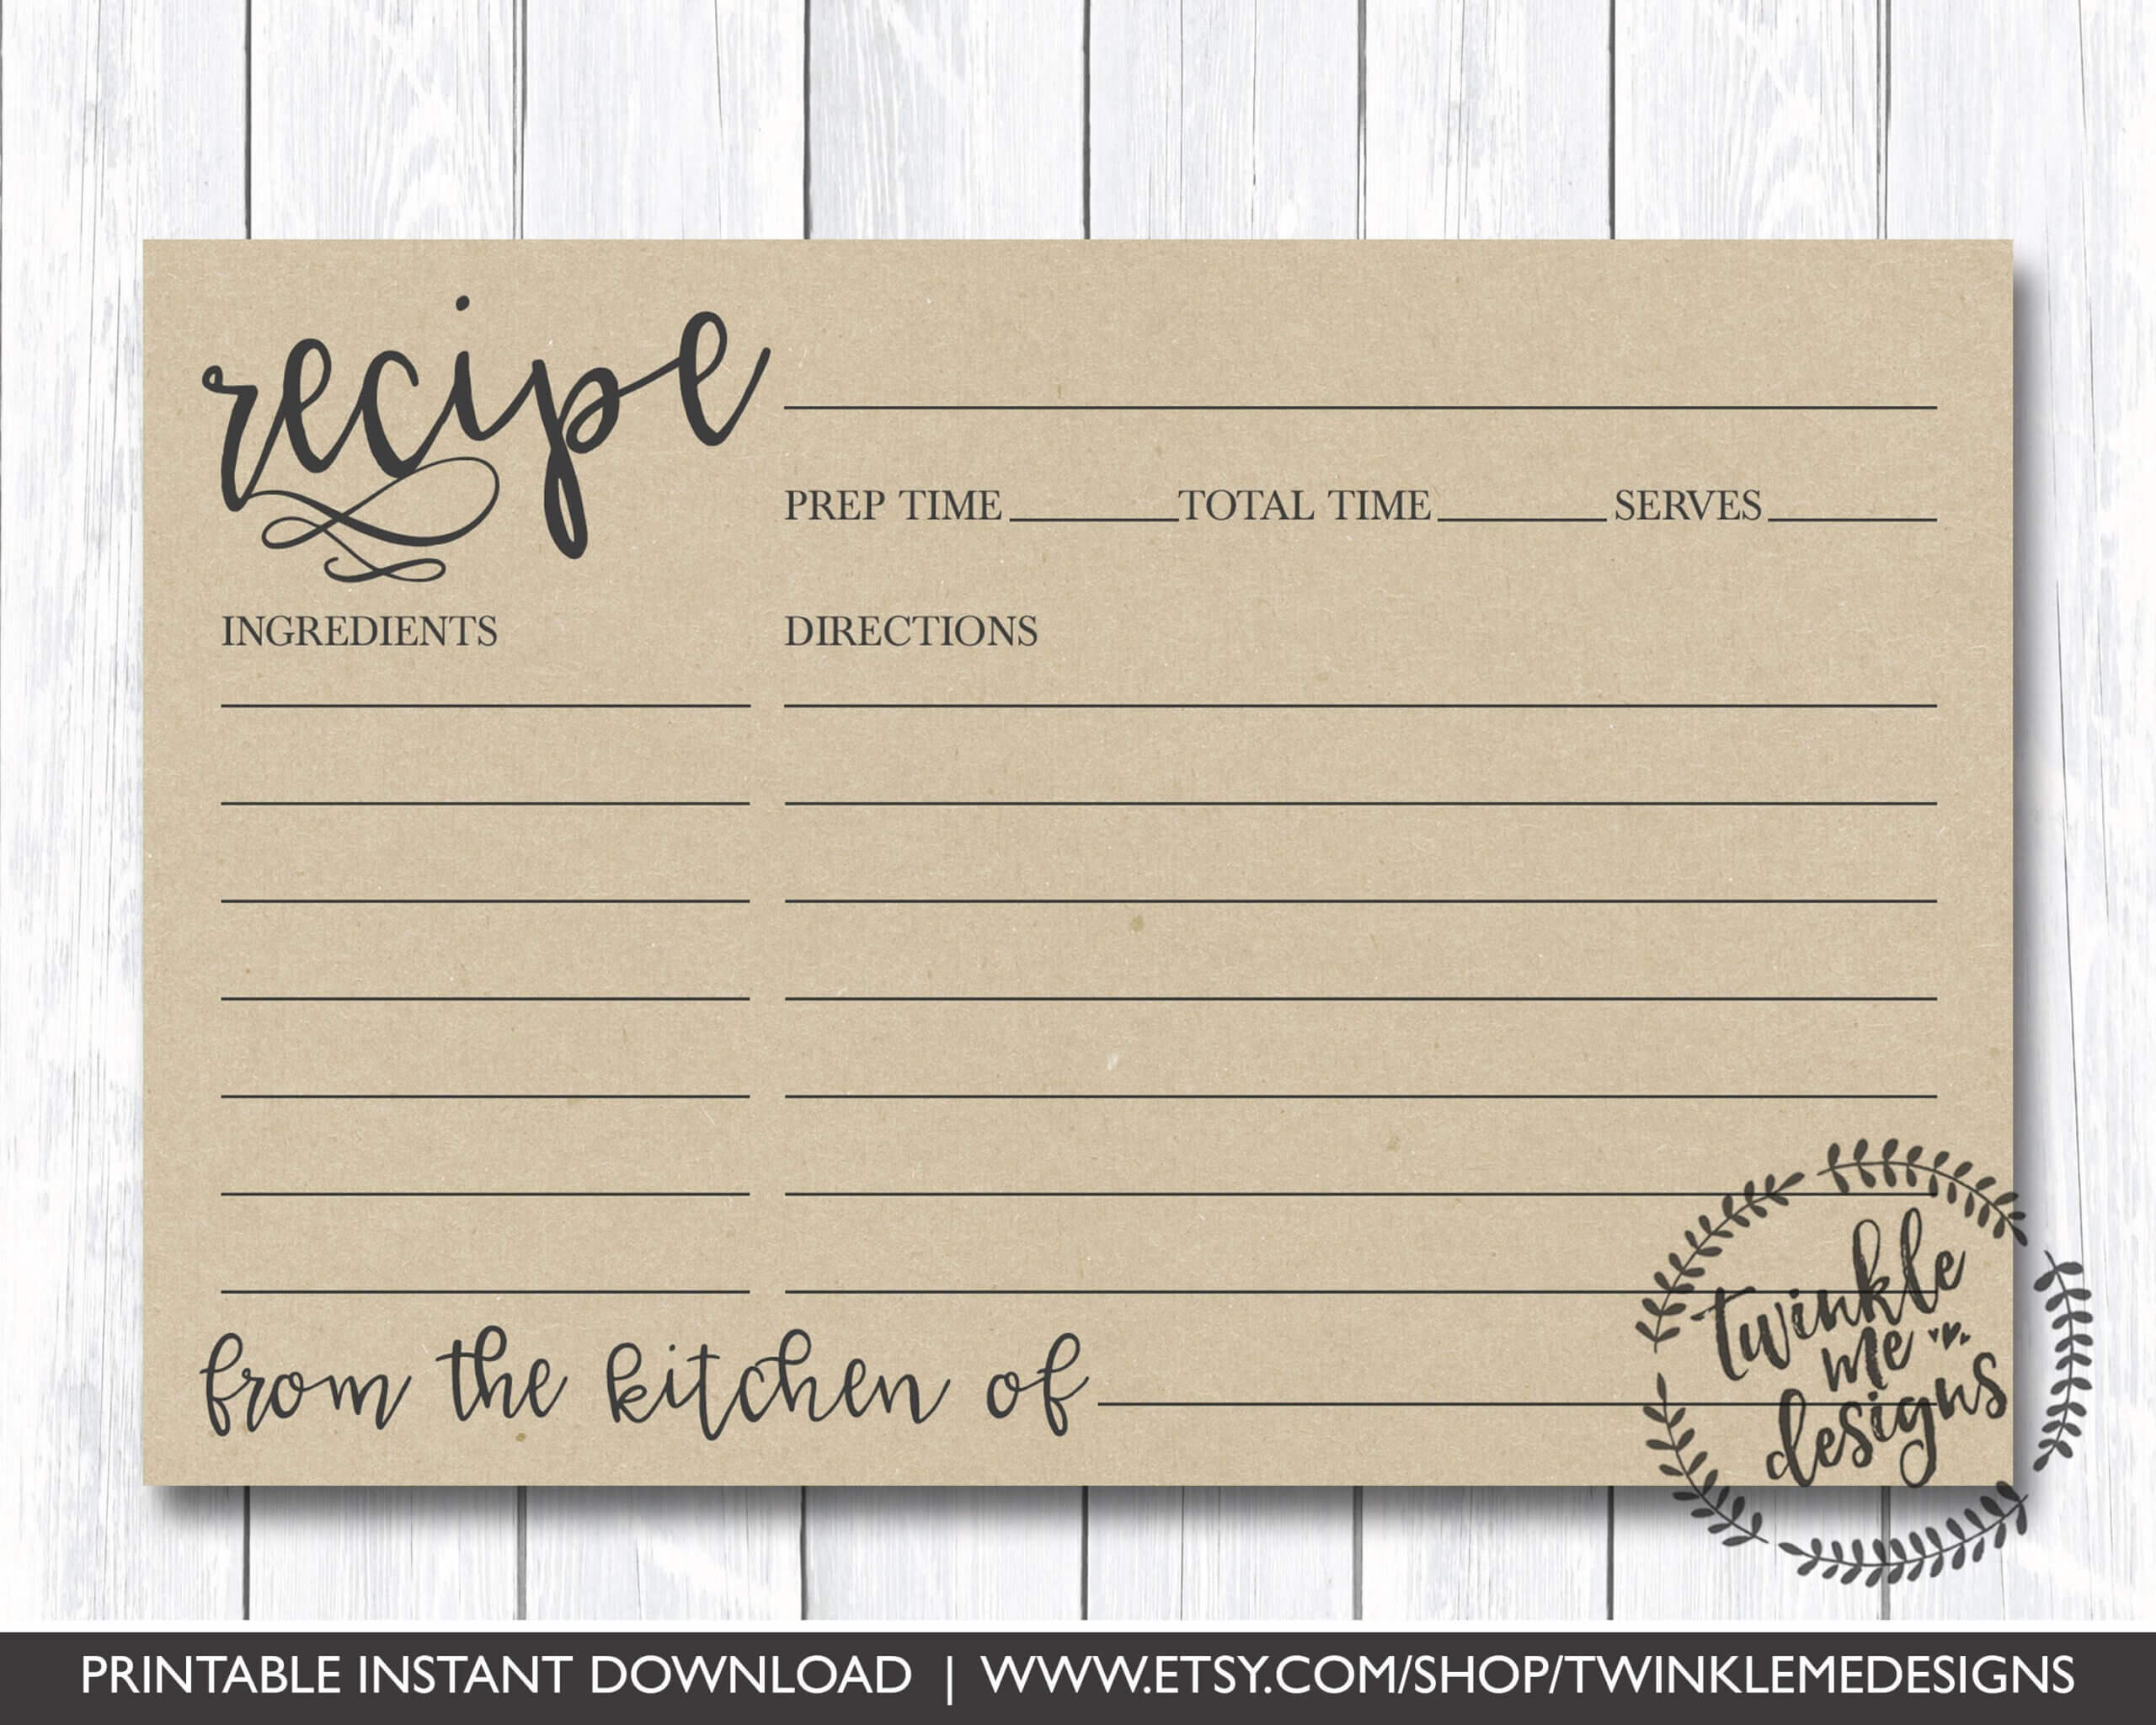 Printable 4×6 Recipe Cards | Template Business Psd, Excel Within 4X6 Photo Card Template Free